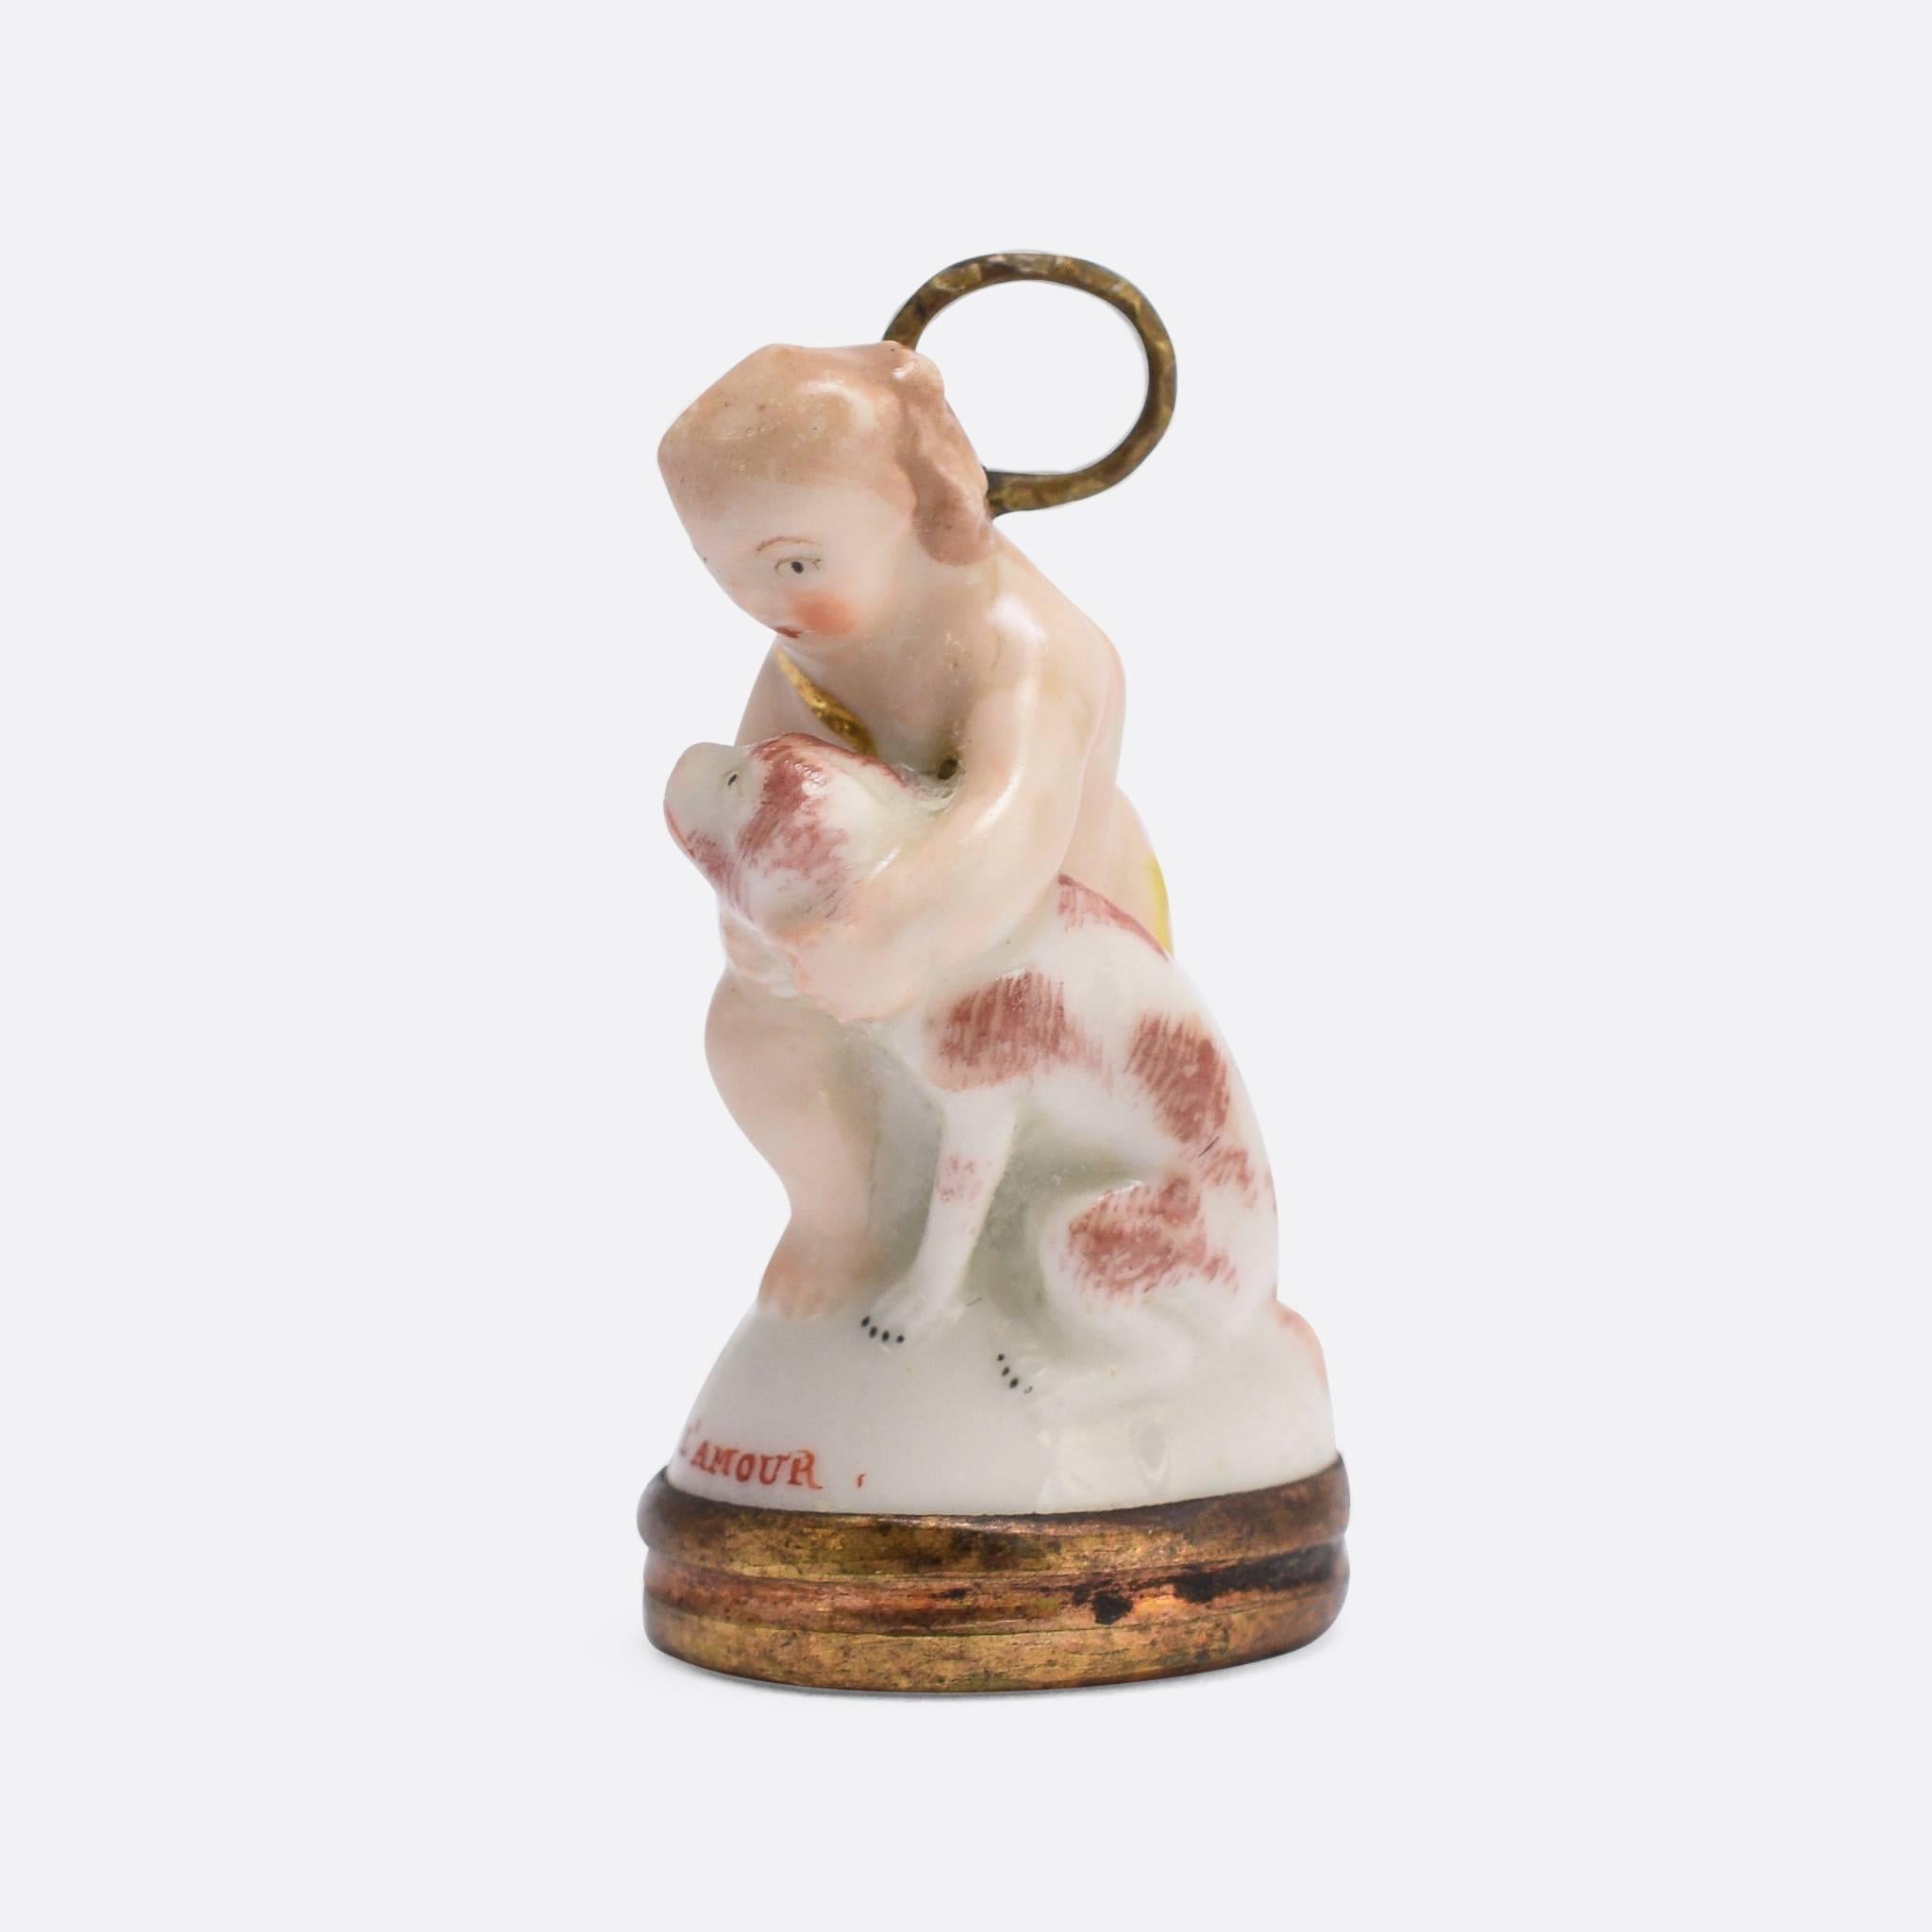 An original 18th Century porcelain Derby Chelsea period fob seal. This particular piece features Cupid and a dog and displays the pale colouring typical of the Chelsea factory. The original gold bail and seal base are both present on this Georgian